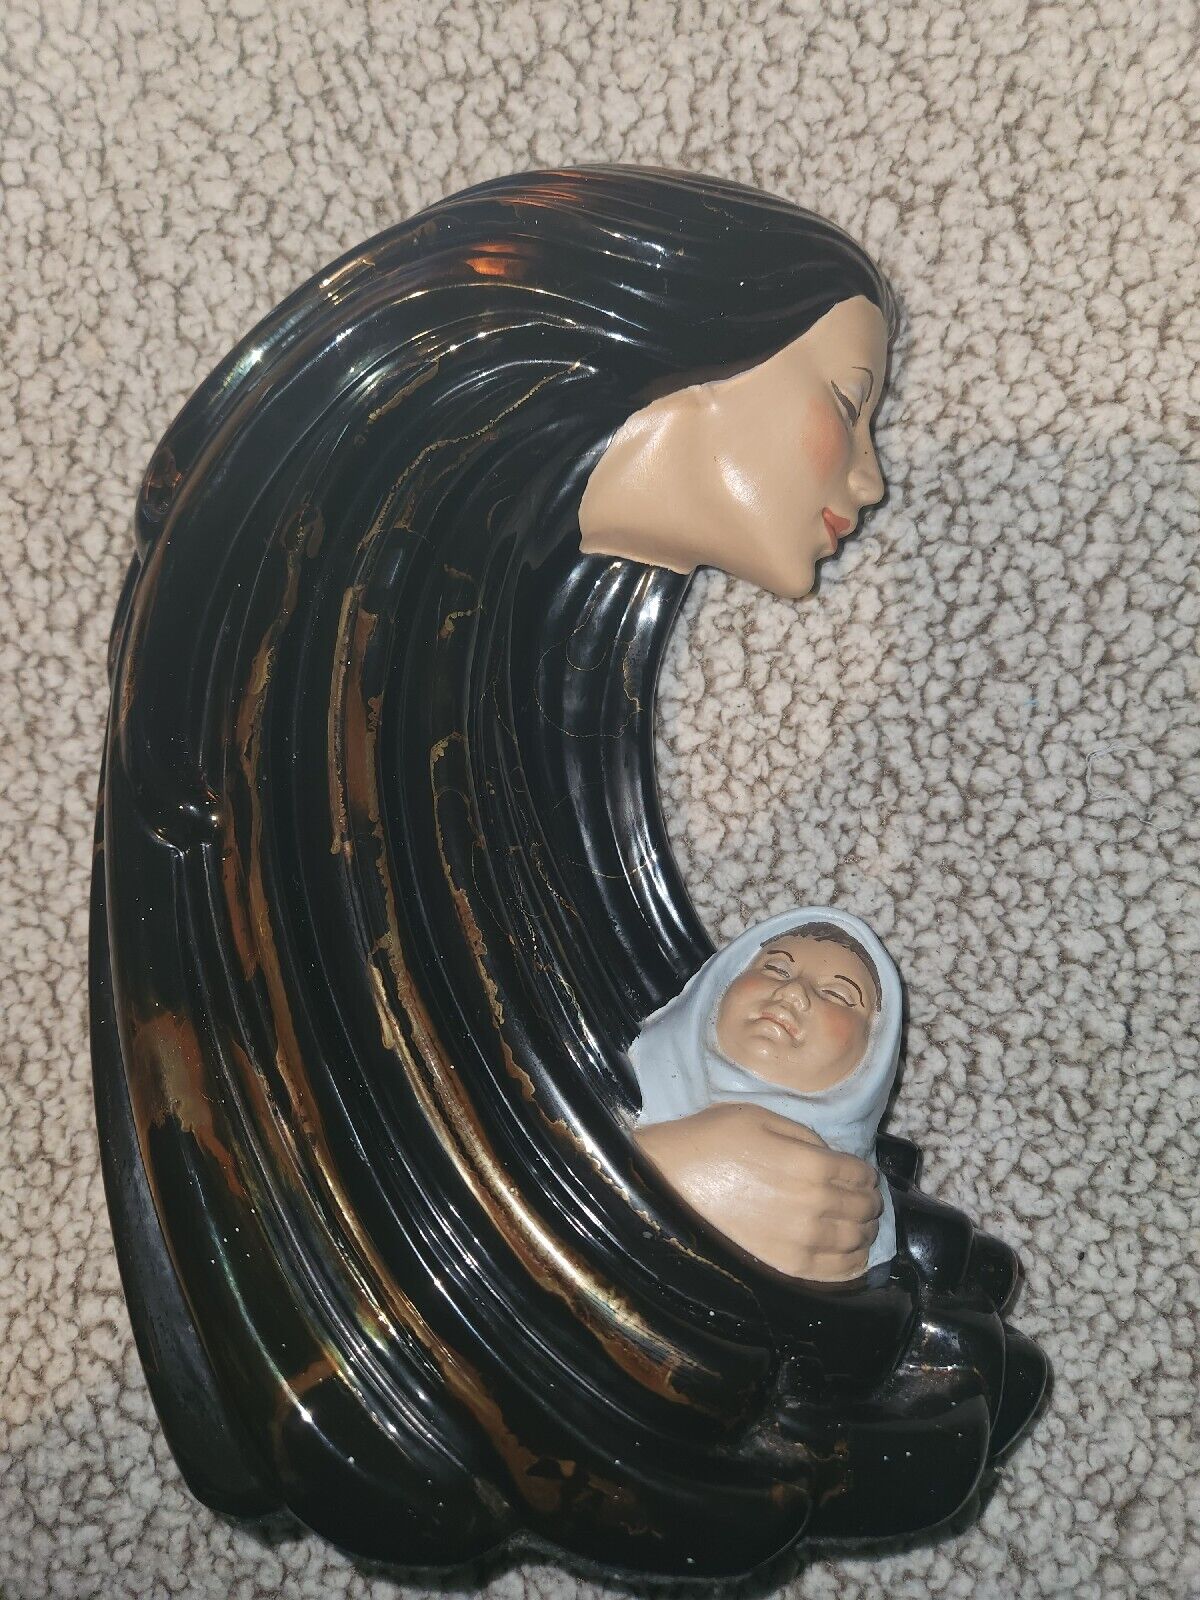 Vintage Sittre Ceramic Mother And Baby Wind Lady Face Hand Painted